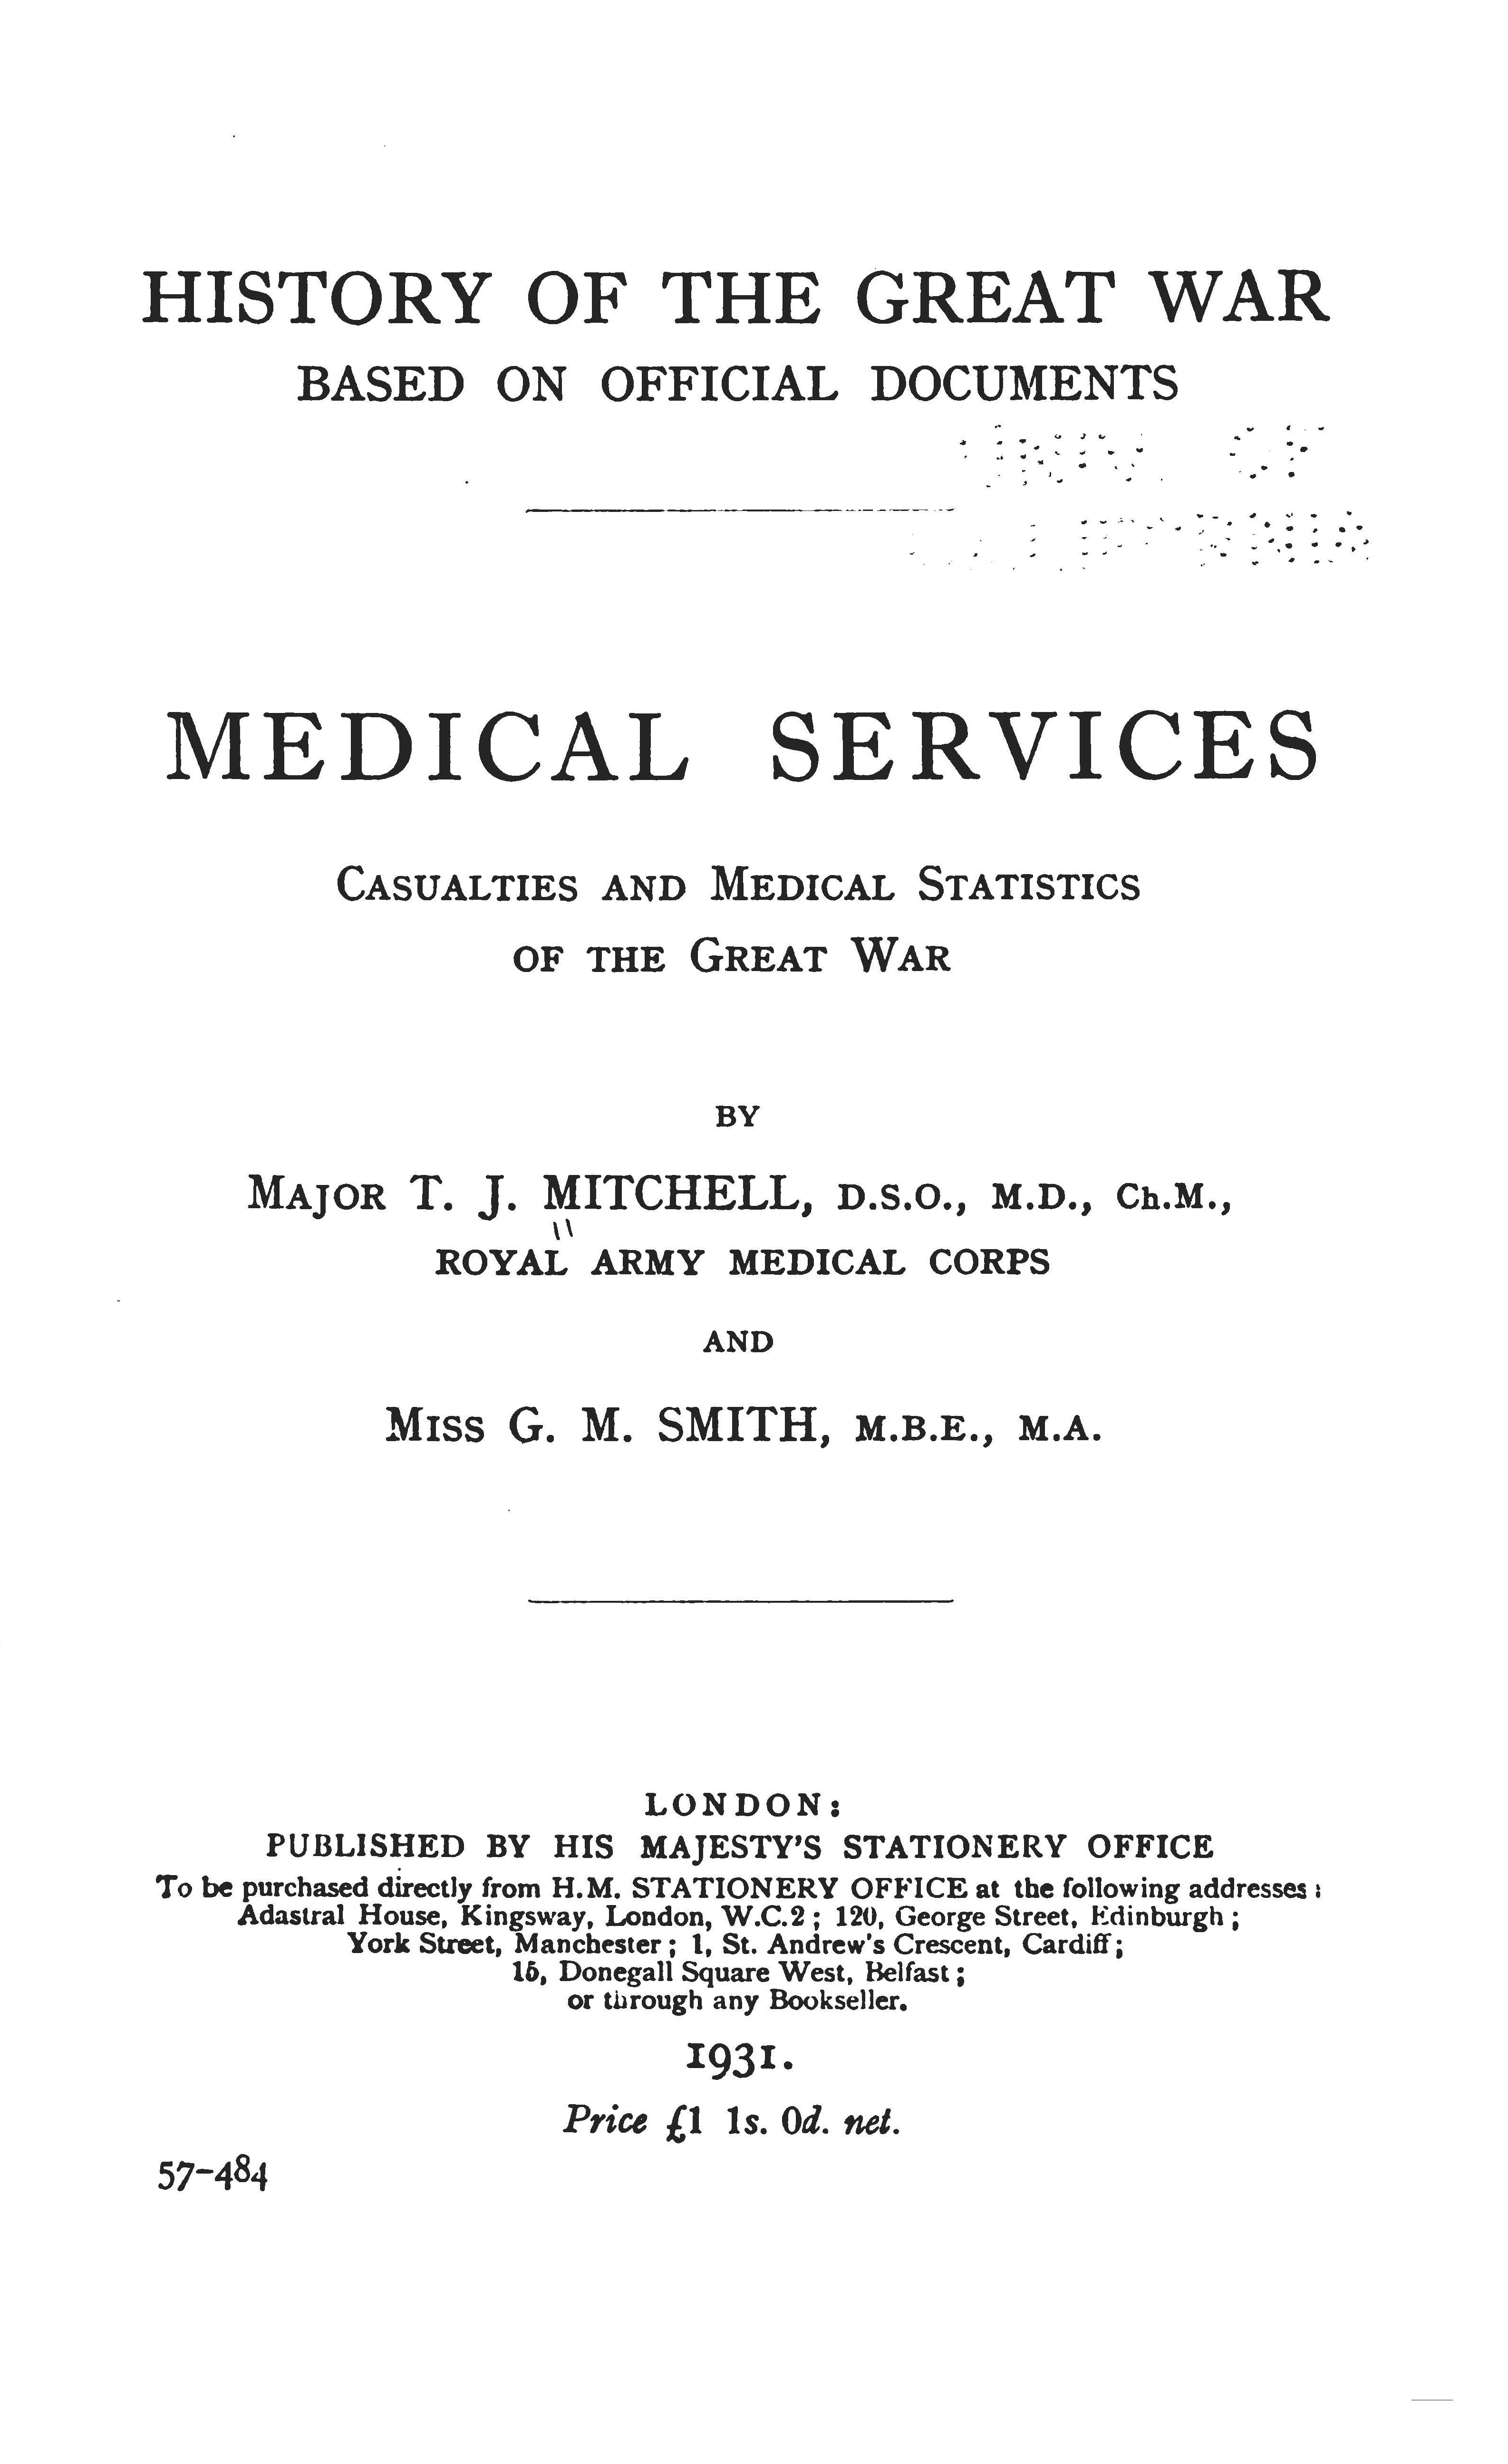 Scanned book cover page. Text of page reads:  HISTORY OF THE GREAT WAR  BASED ON OFFICIAL DOCUMENTS MEDICAL SERVICES CASUALTIES AND MEDICAL STATISTICS OF THE GREAT WAR by Major T. J. MITCHELL, D.S.O., M.D., Ch.M., Royal Army Medical Corps  and Miss G. M. SMITH, M.B.E., M.A. LONDON: PUBLISHED BY HIS MAJESTY'S STATIONERY OFFICE To be purchased directly from H.M. STATIONERY OFFICE at the following addresses : Adastral House, Kingsway, London, W.C.2 ; 120, George Street, Edinburgh ; York Street, Manchester ; 1. St. Andrew's Crescent, Cardiff ; 16, Donegall Square West. Belfast ; or through any Bookseller. 1931. Price £1 ls. 0d. net.